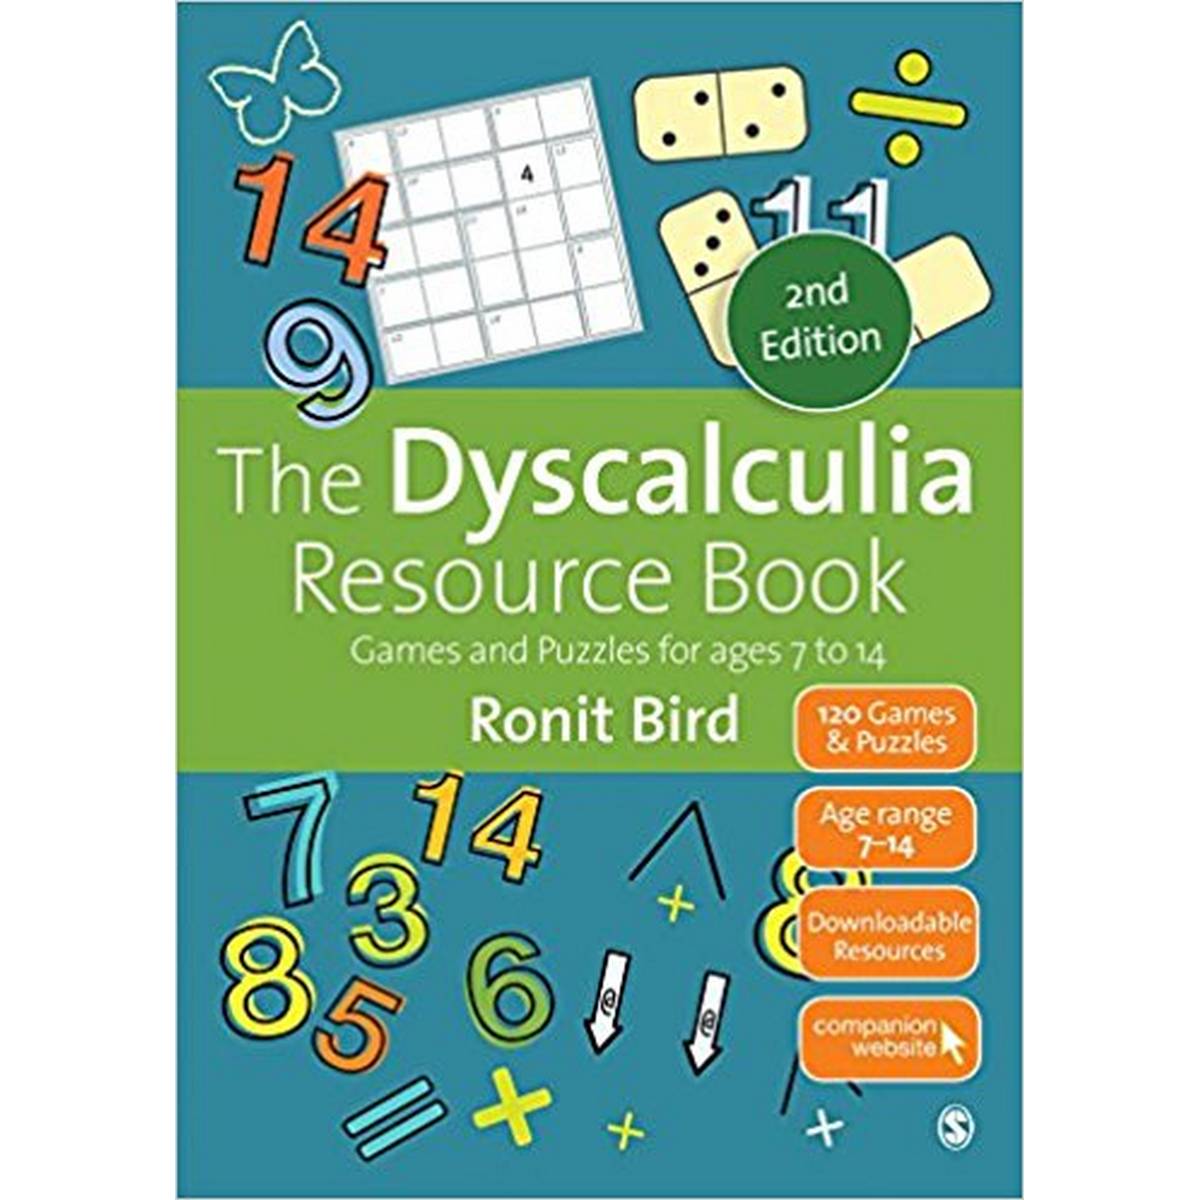 Dyscalculia Resource Book: Games and Puzzles for ages 7 to 14 (2nd Edition)